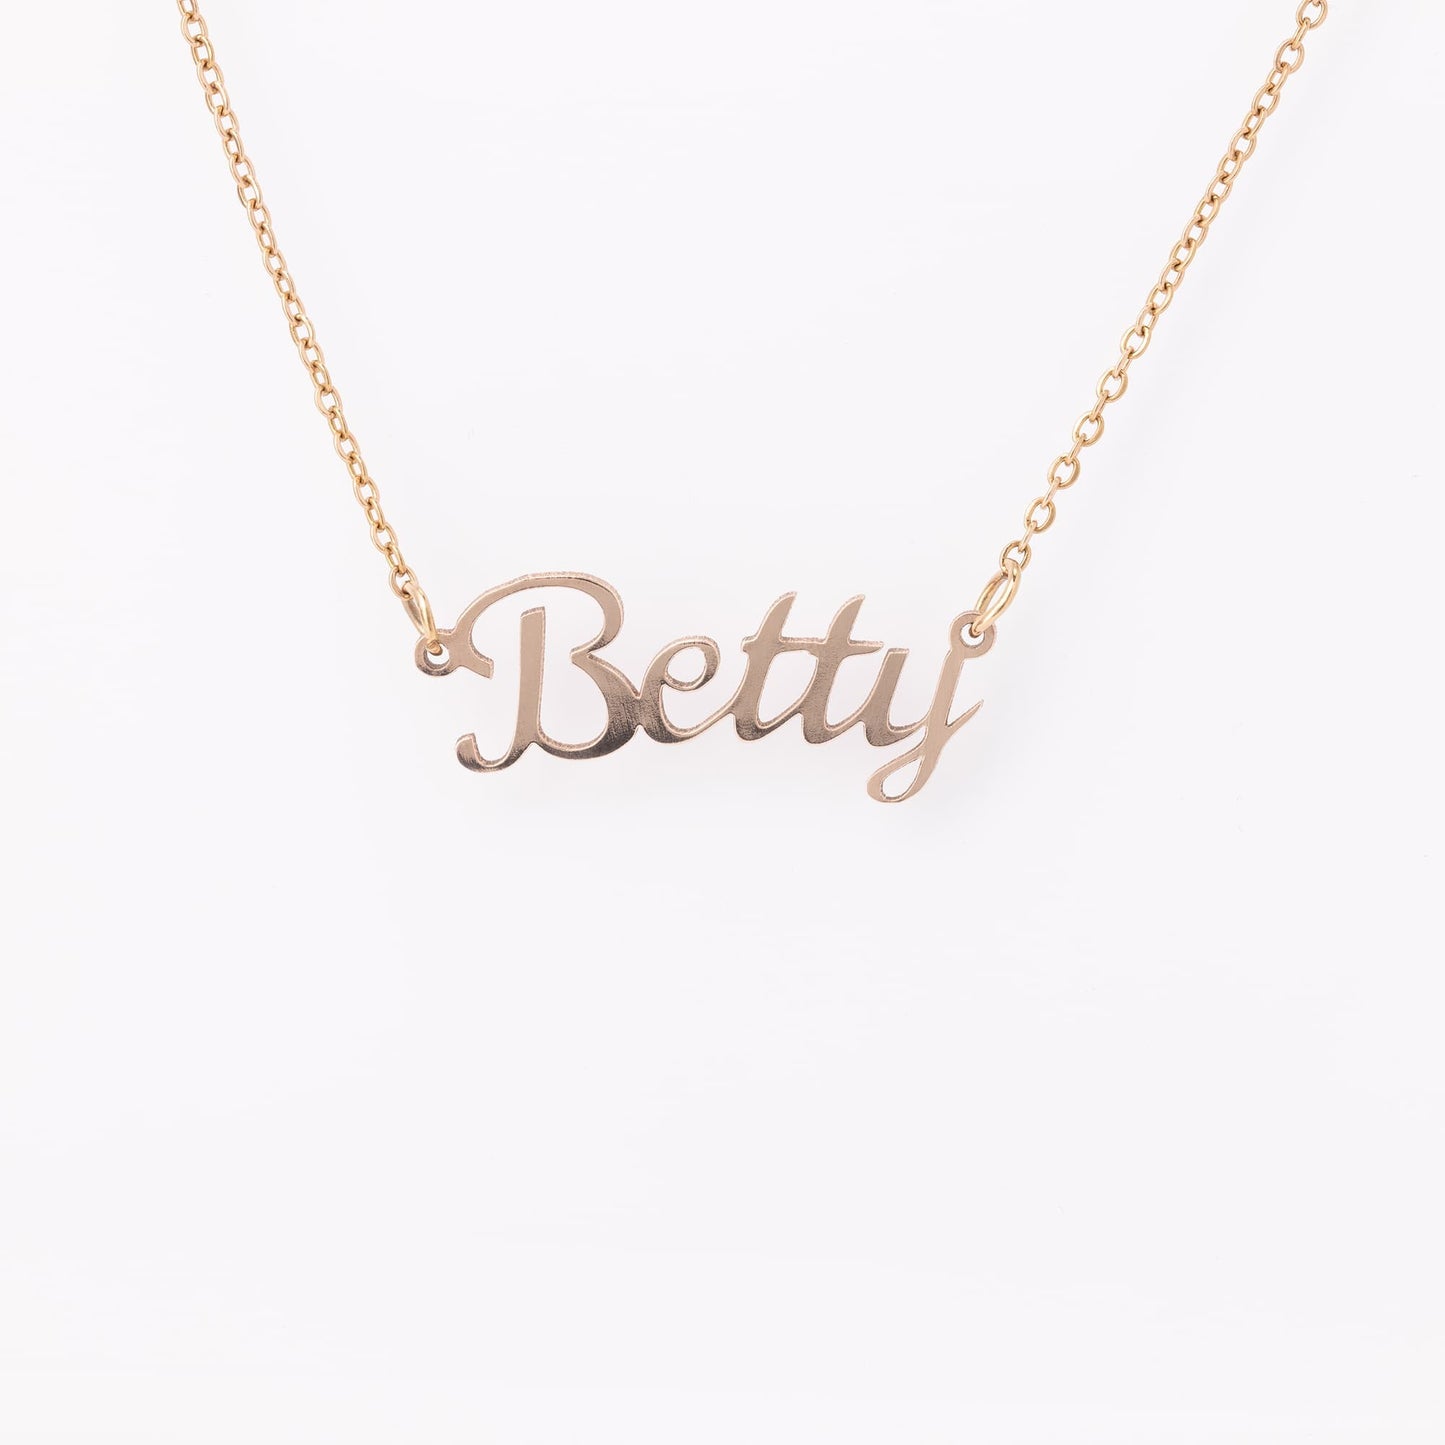 Cookie Font Name Necklace - Perfect Gift for Mom, Personalized Gift for Any Occasion, Ecofriendly